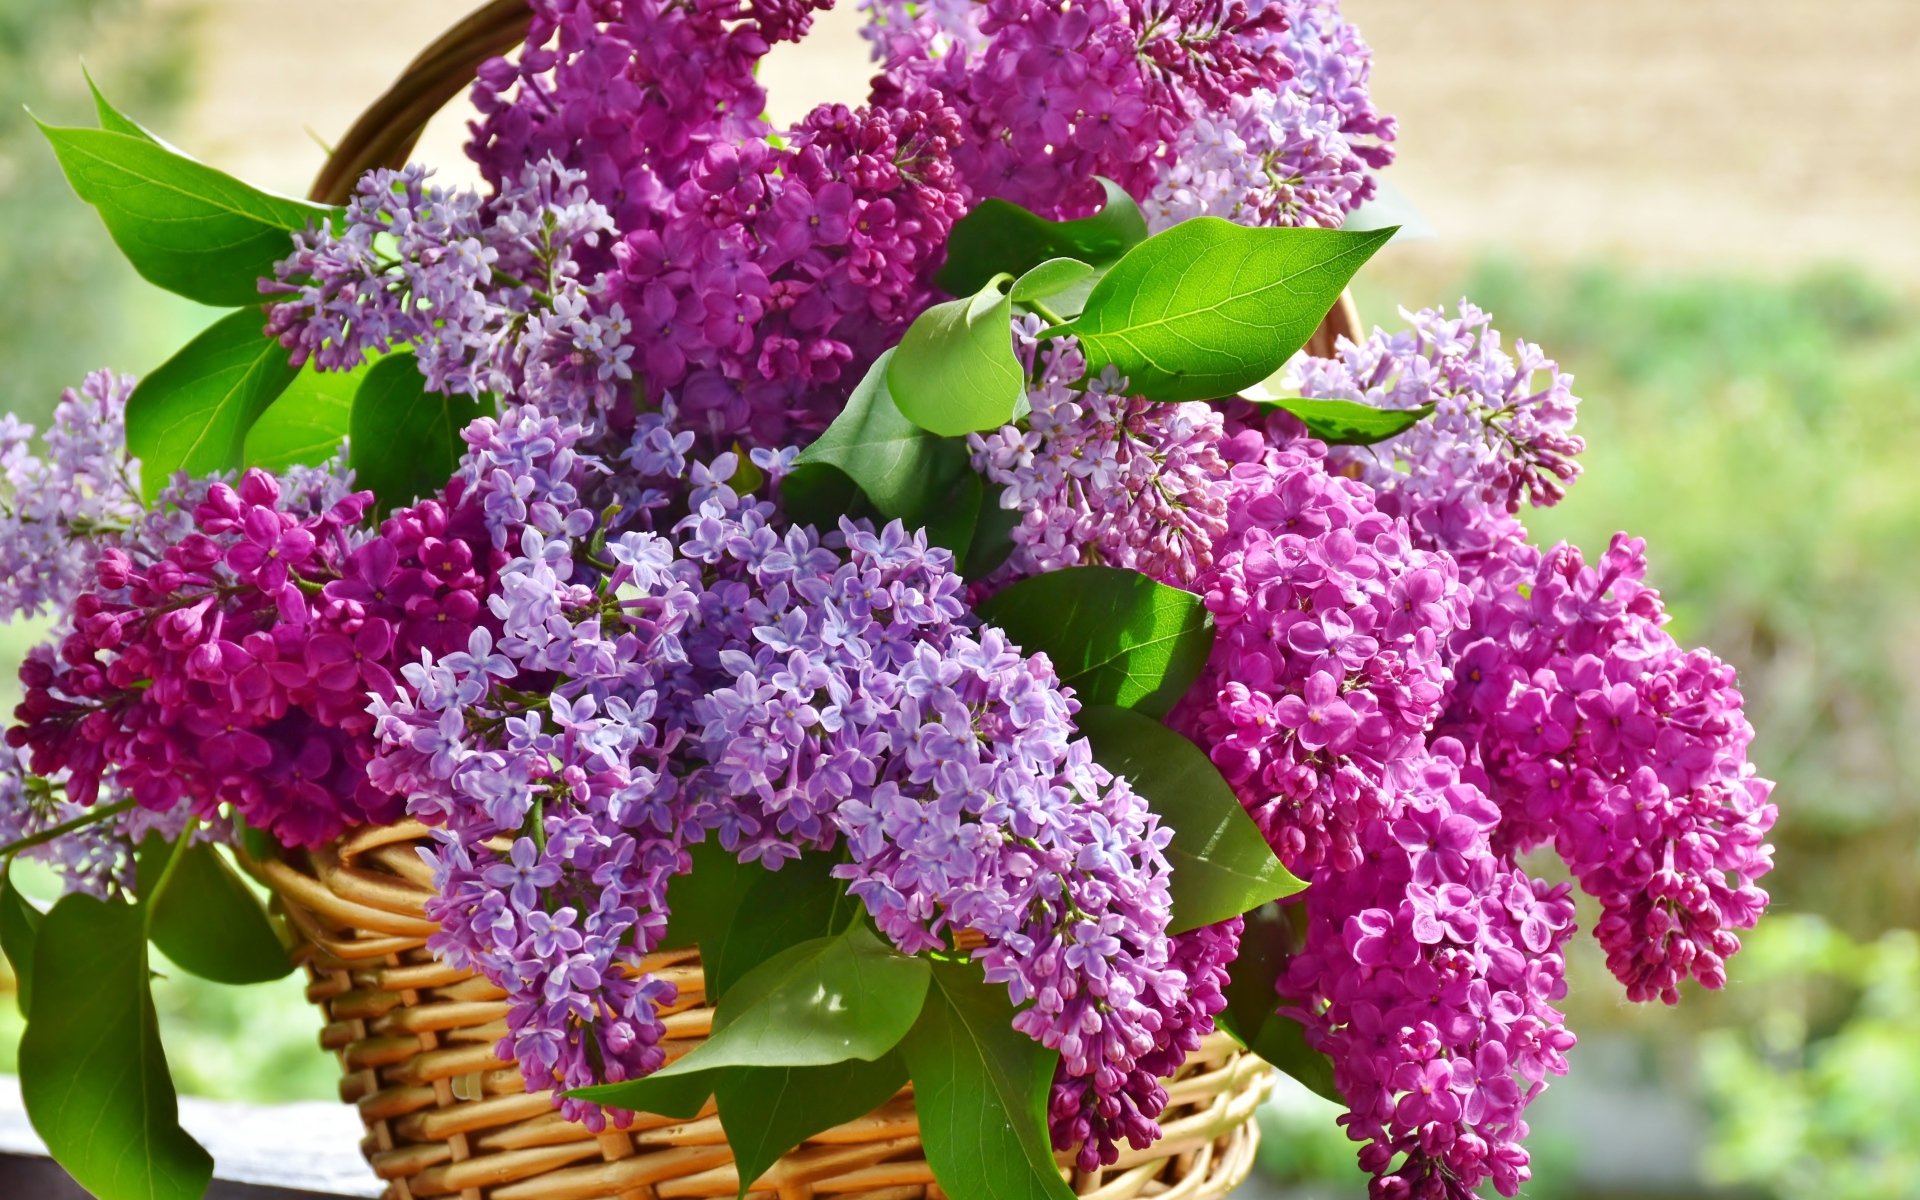 A bouquet of beautiful lilac in a basket